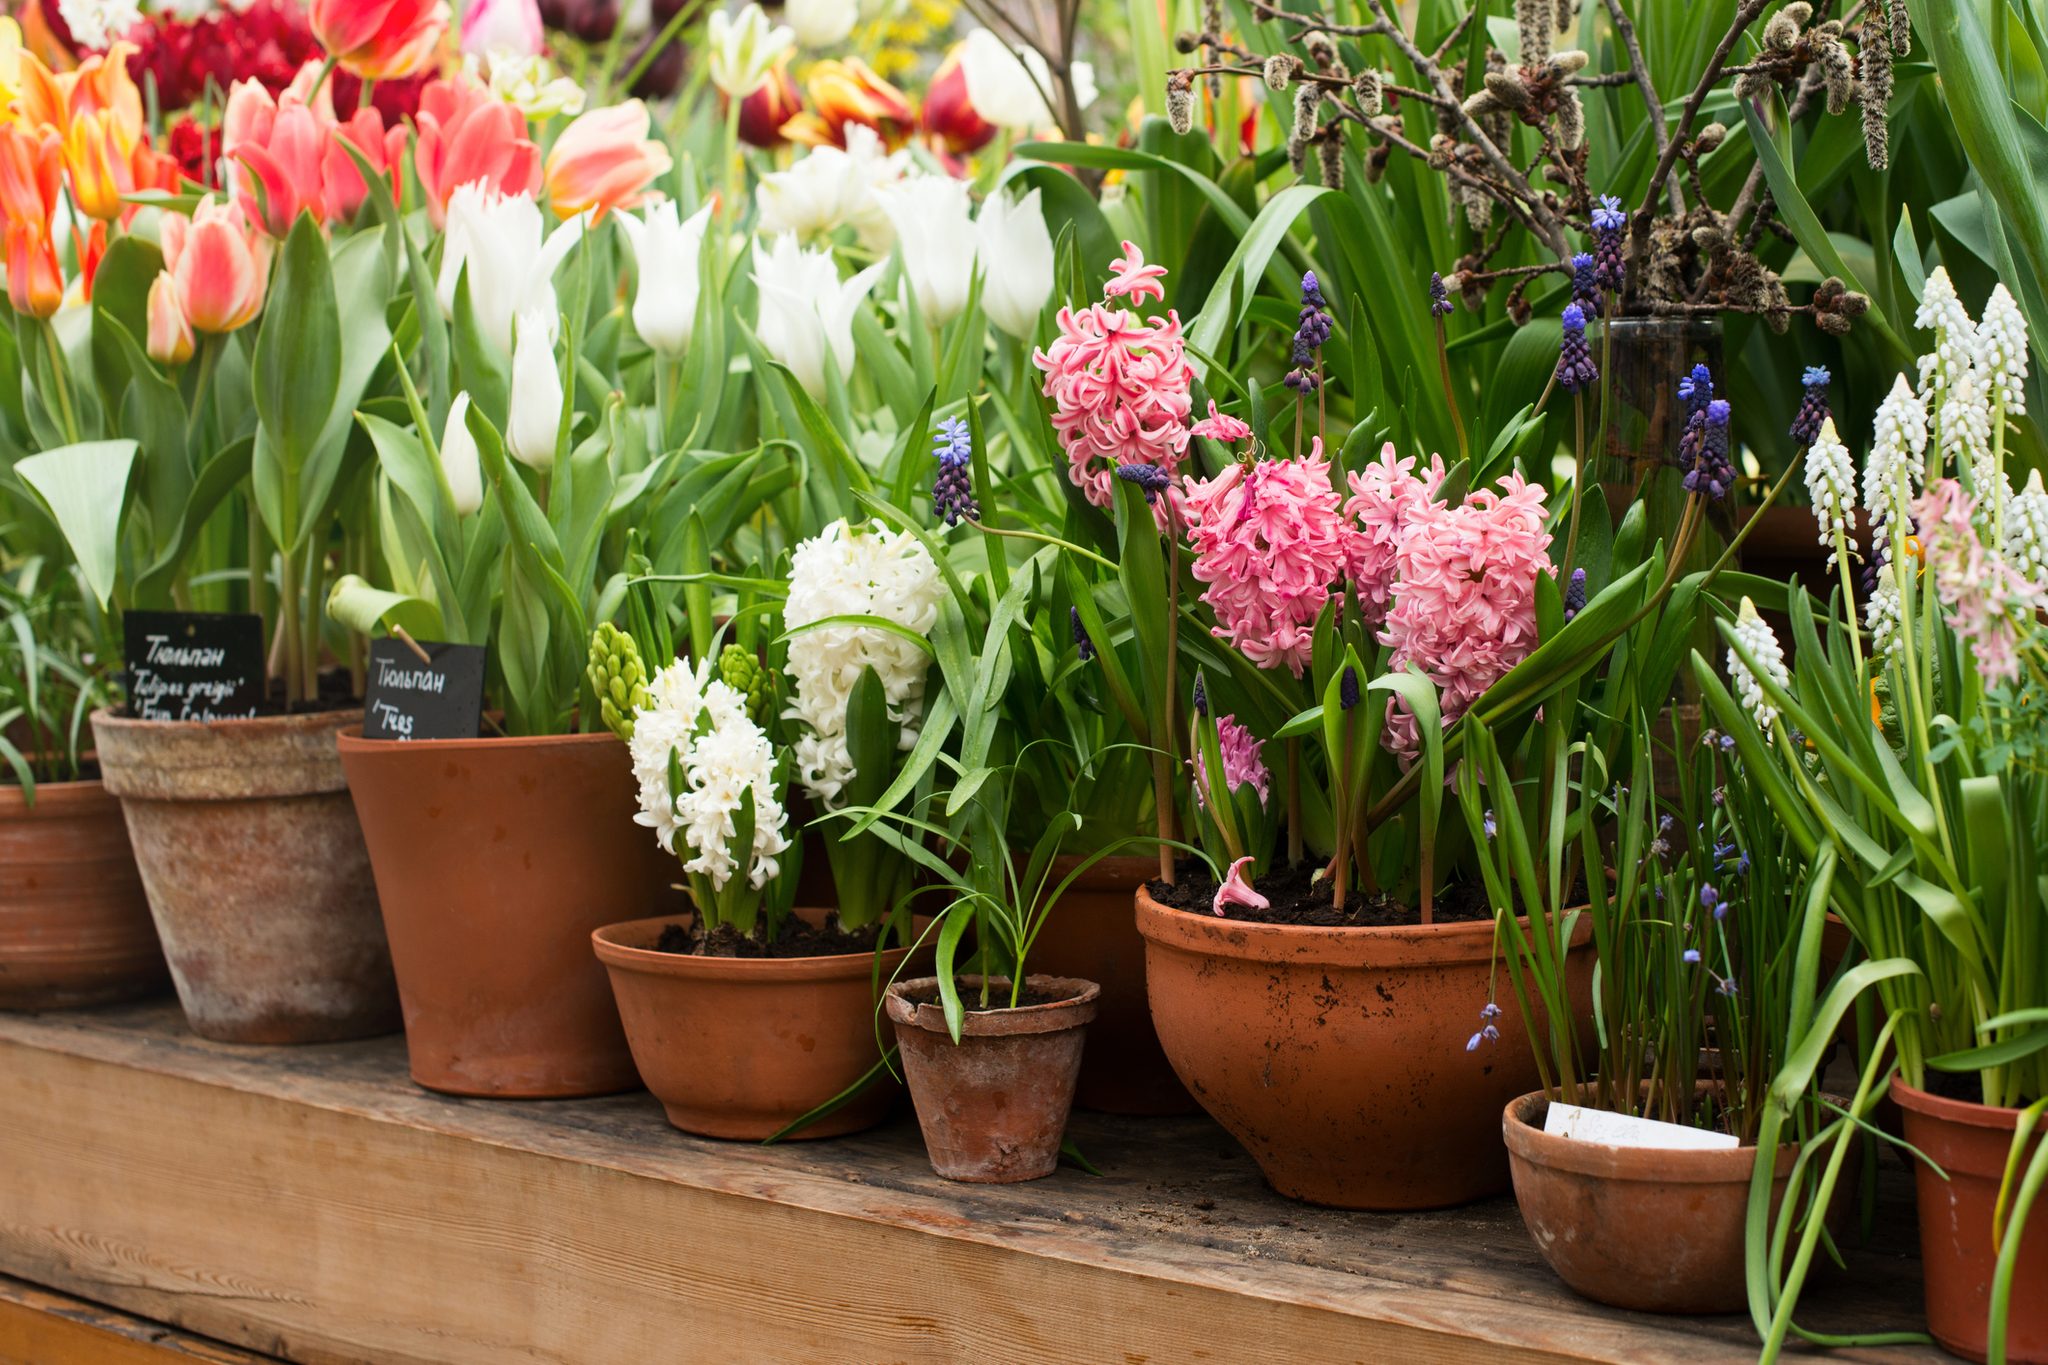 What To Know About Planting Bulbs in Pots | The Family Handyman